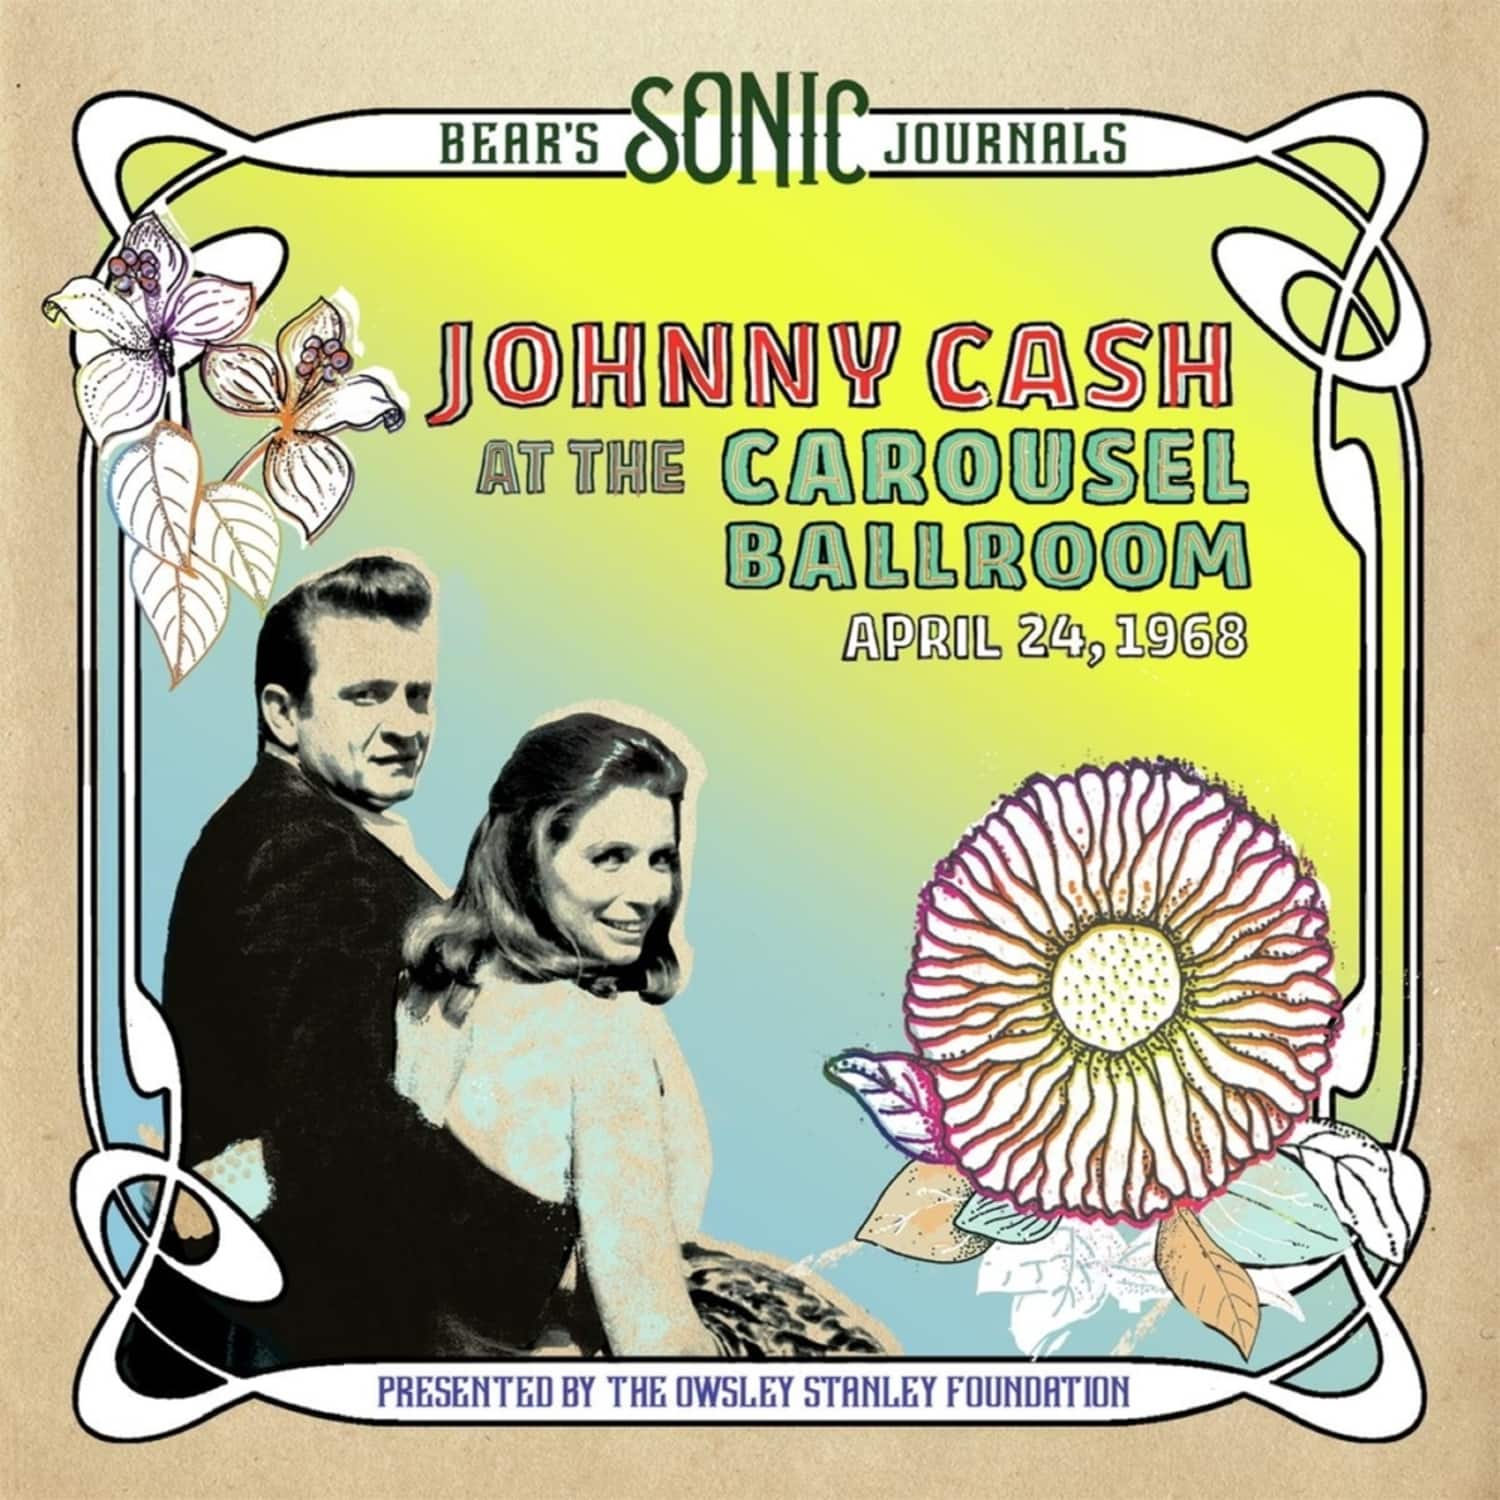 Johnny Cash - BEARS SONIC JOURNALS:JOHNNY CASH,AT THE CAROUSEL 